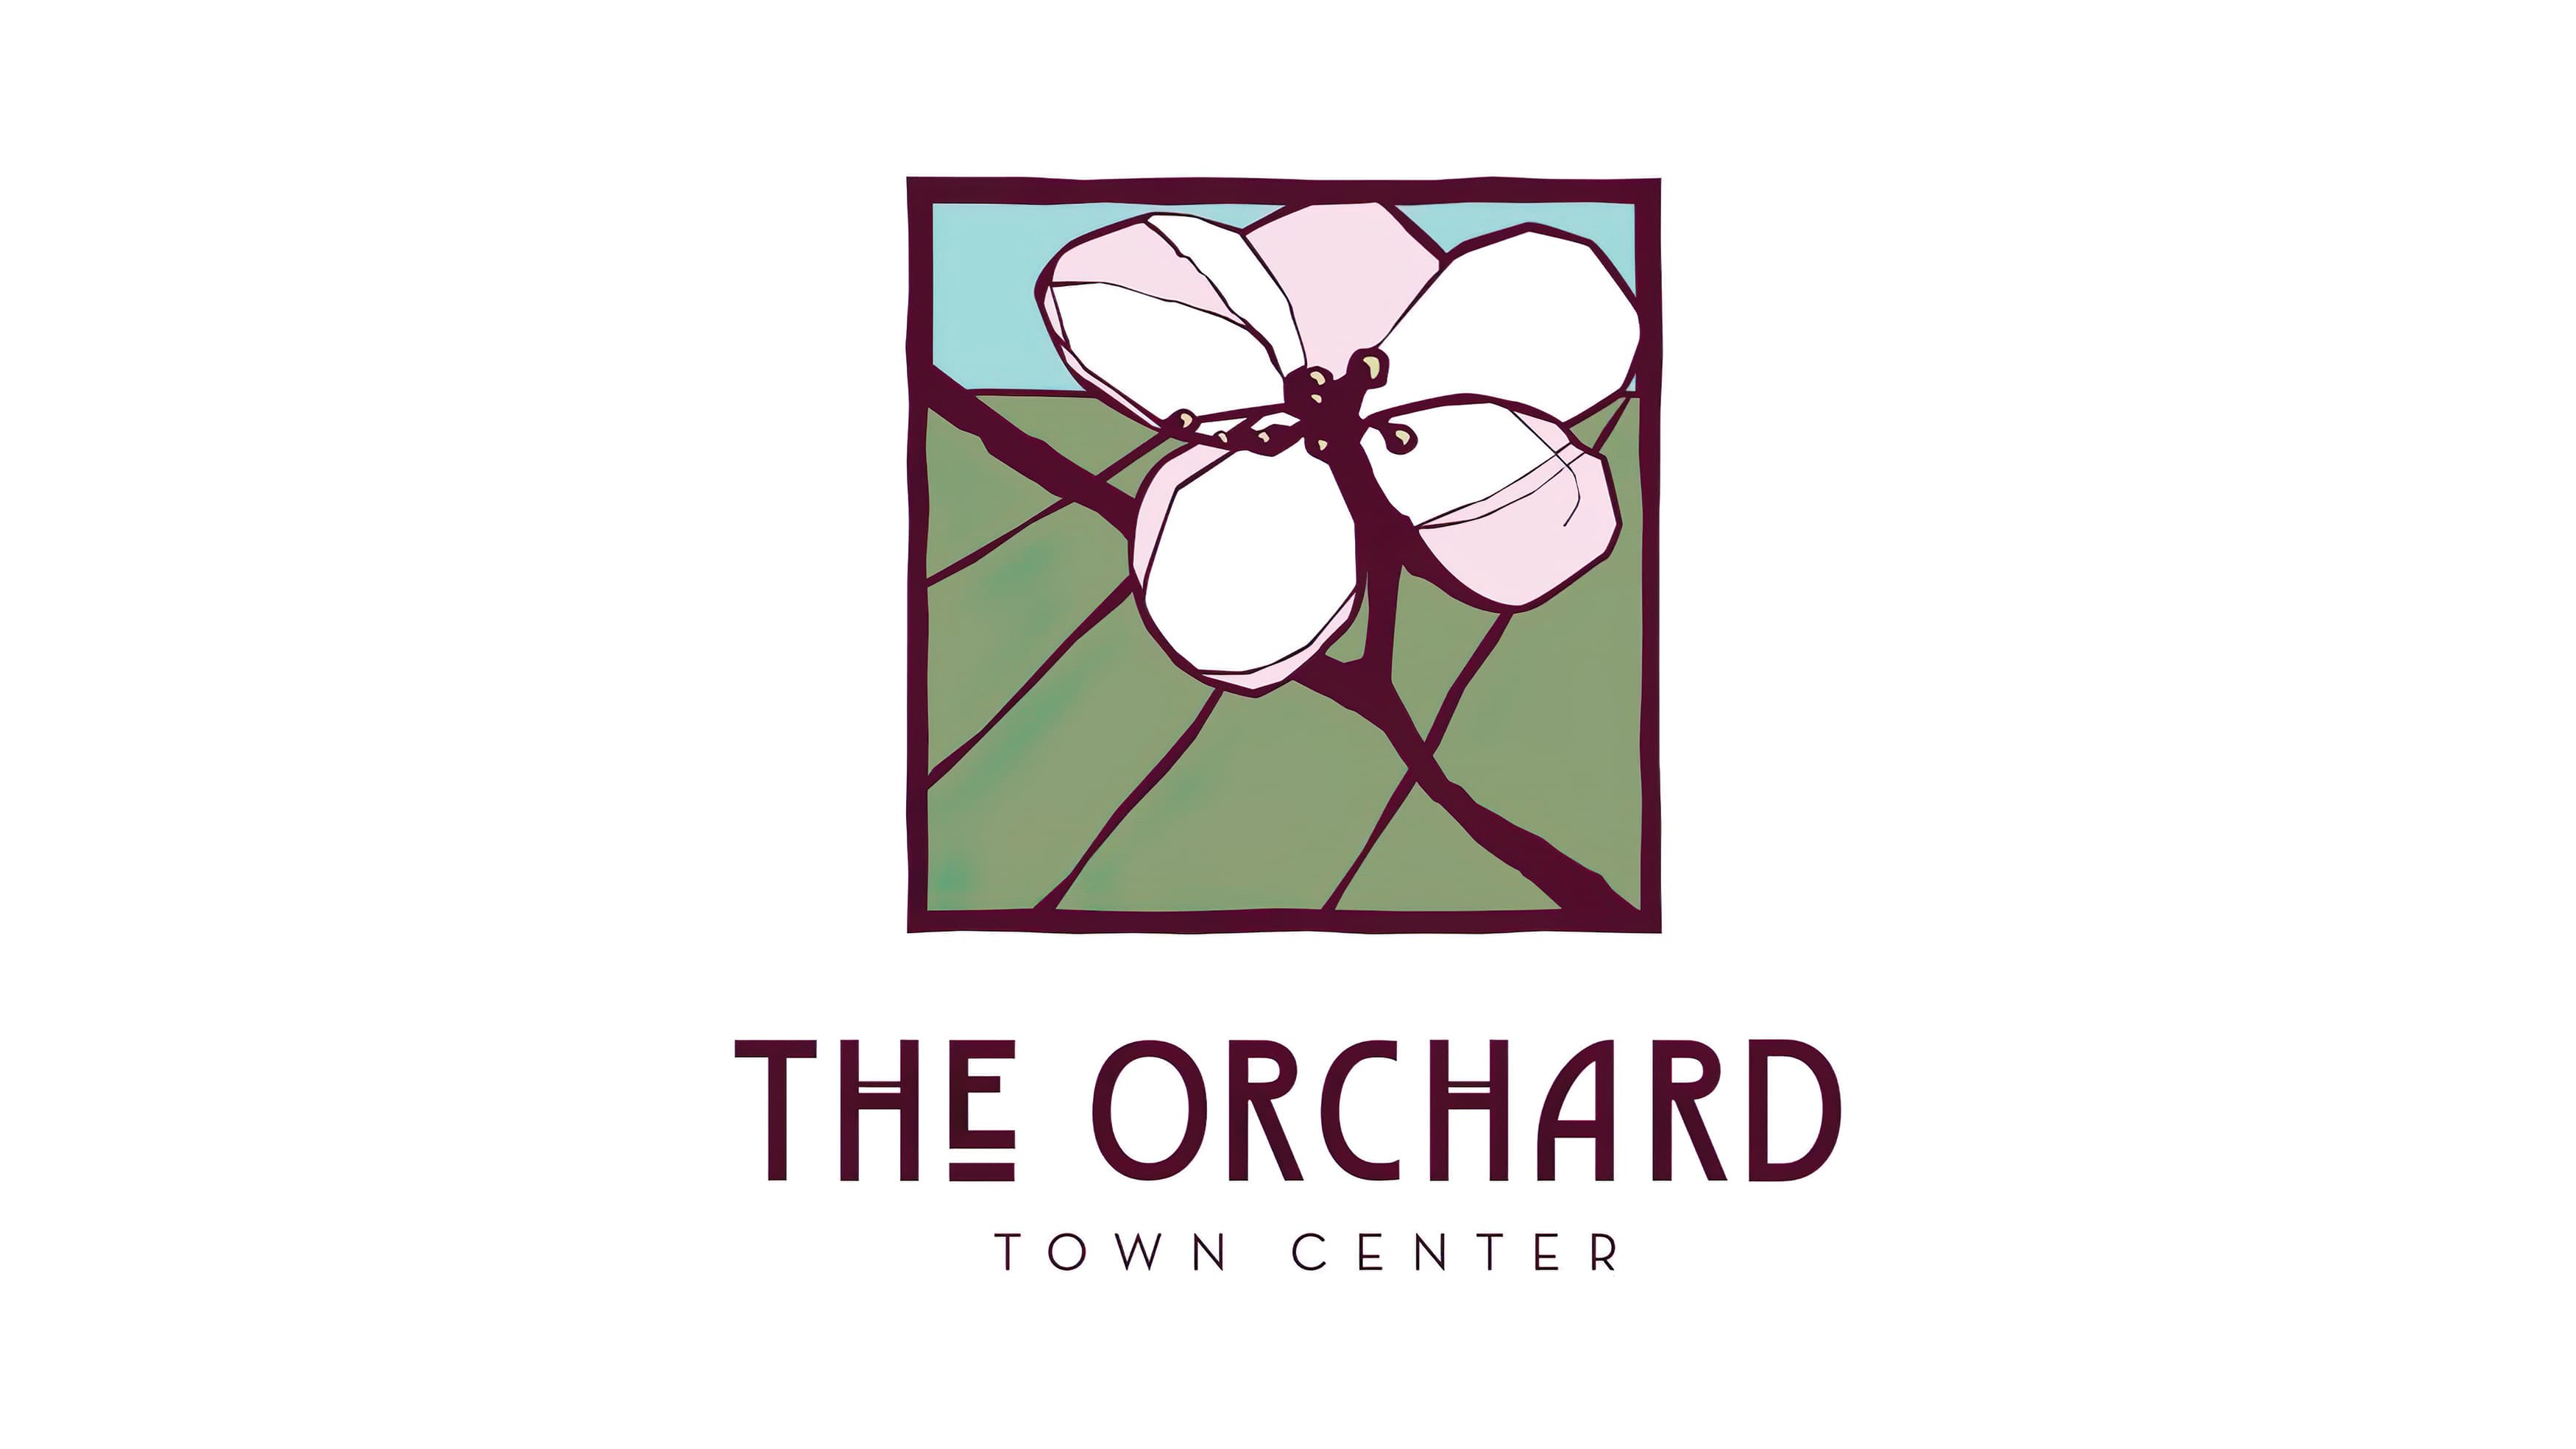 The Orchard stained-glass style flower logo-mark and logo